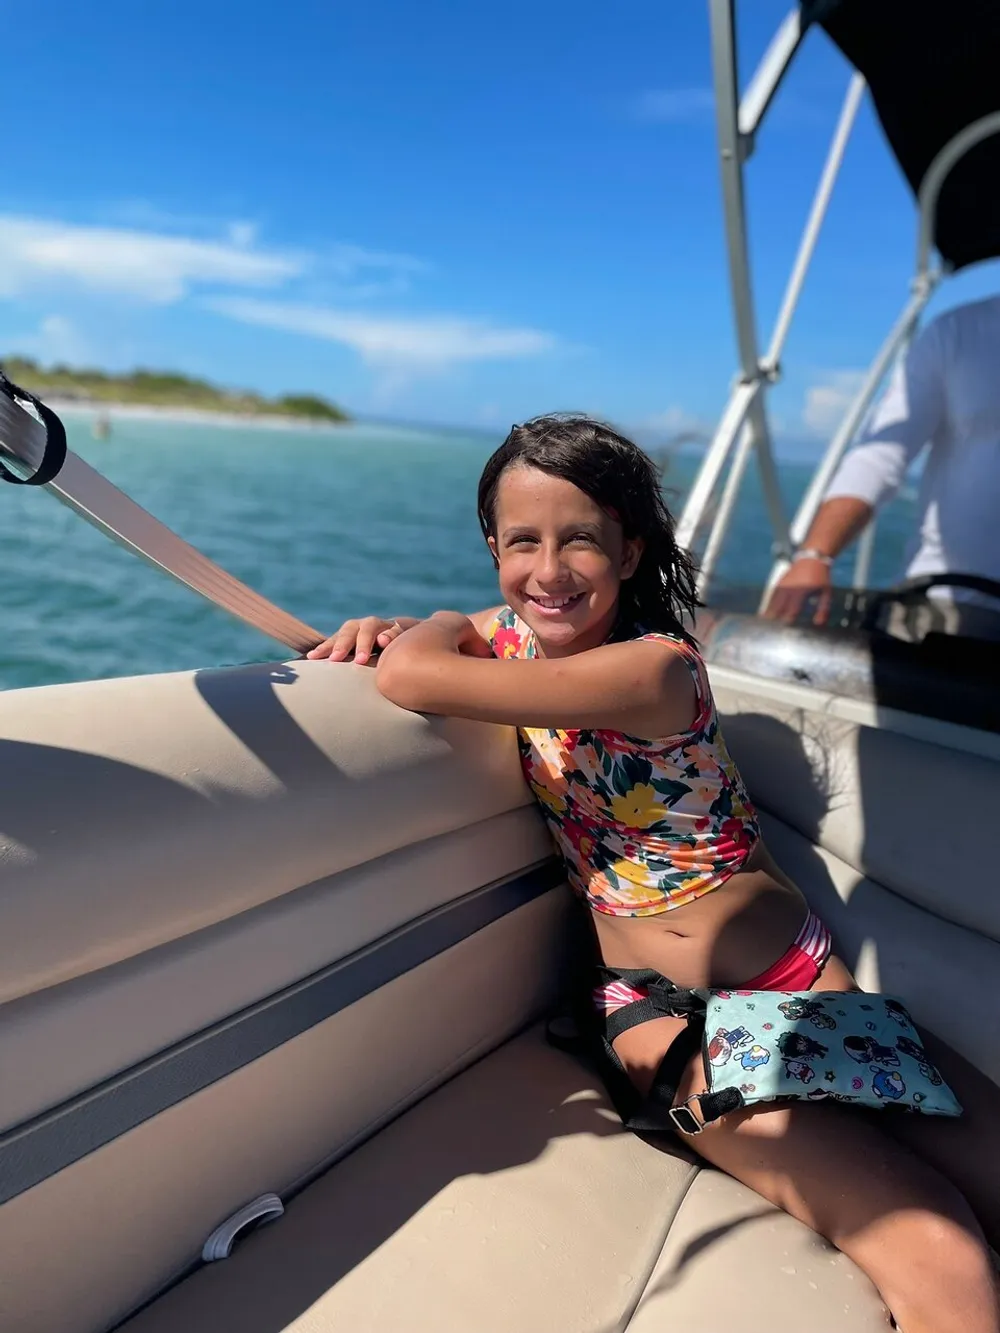 A smiling child in a colorful swimsuit is seated comfortably on a boat with a clear blue sky and water in the background